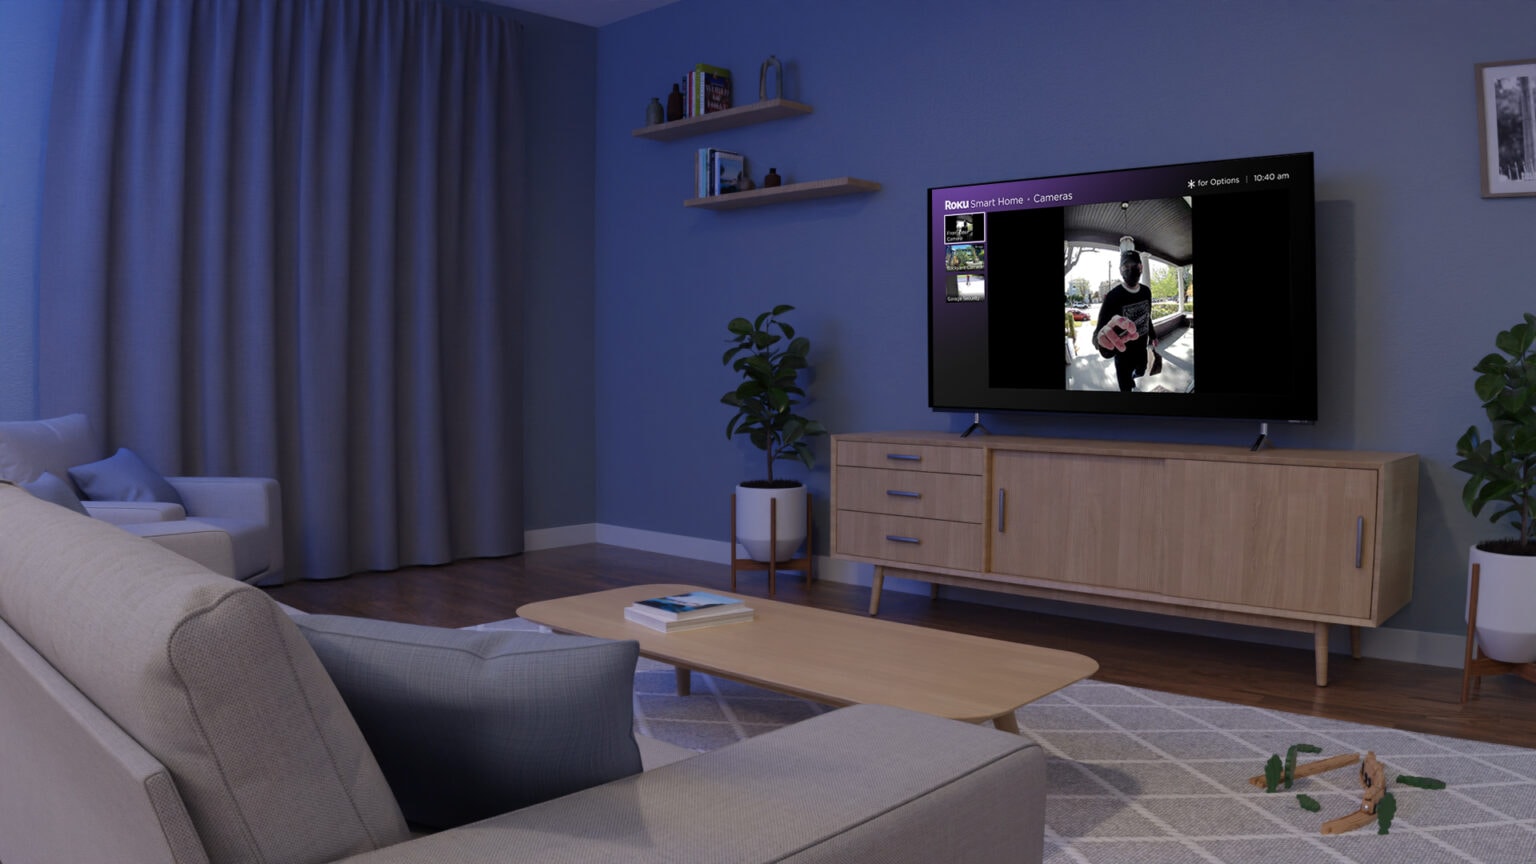 Those who use Roku streaming devices will find the new smart-home gear, like the doorbell camera, integrate seamlessly.